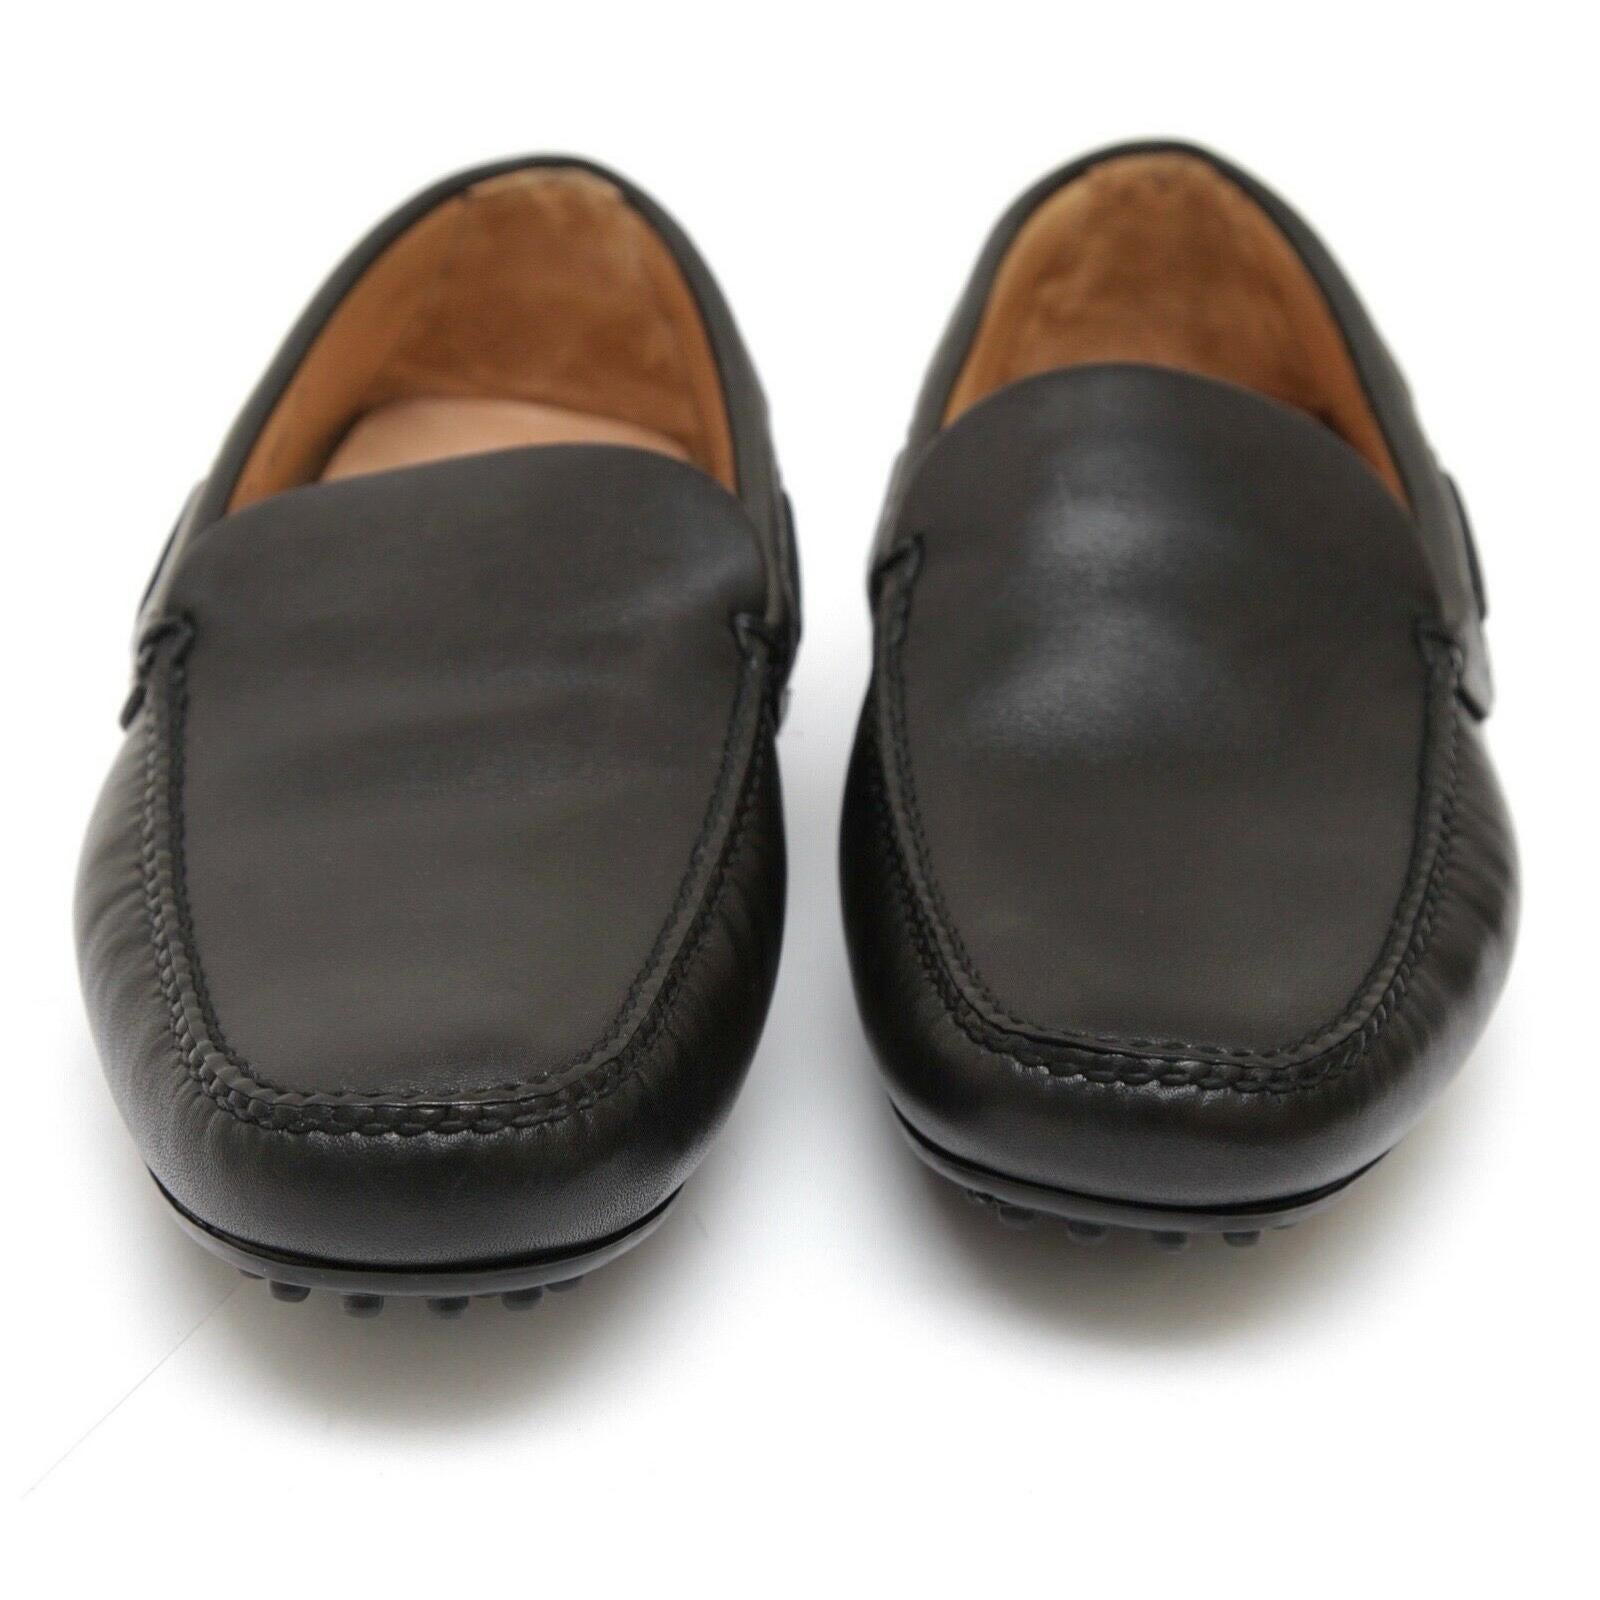 THE ORIGINAL CAR SHOE by PRADA Men's Black Leather Loafer Moccasin Flats 7 In New Condition In Hollywood, FL